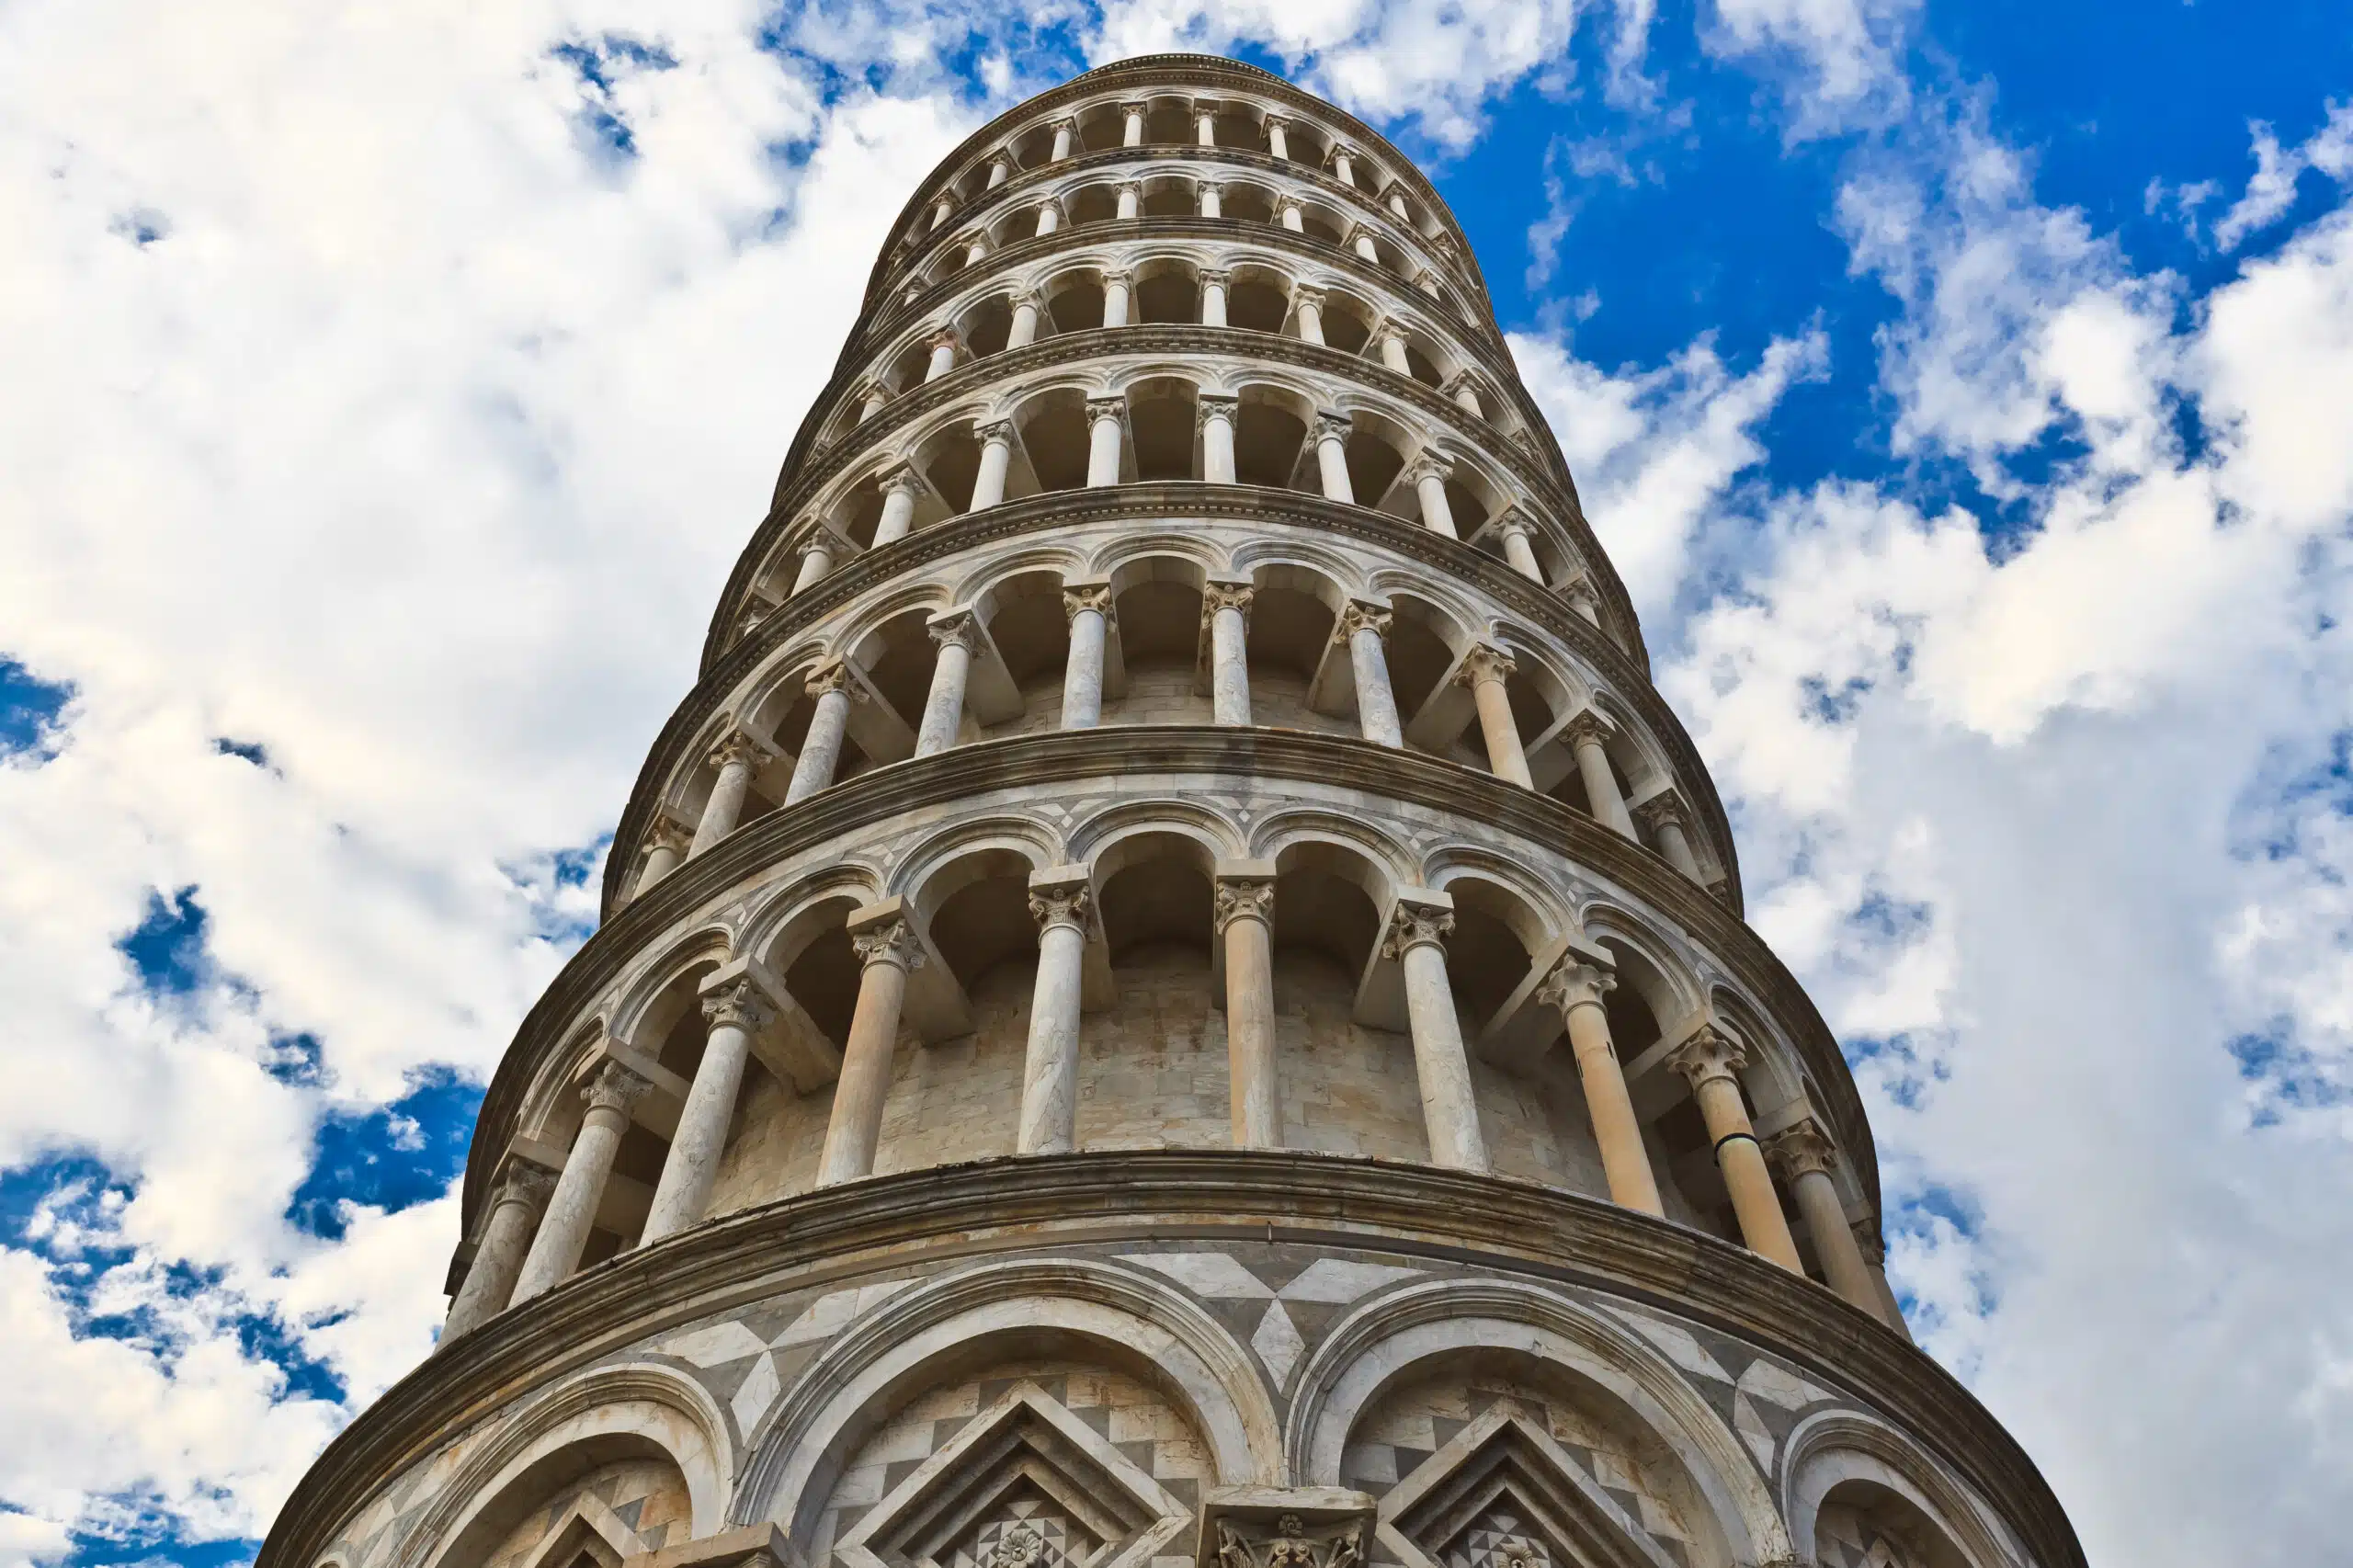 The leaning tower of Pisa Tuscany, Italy